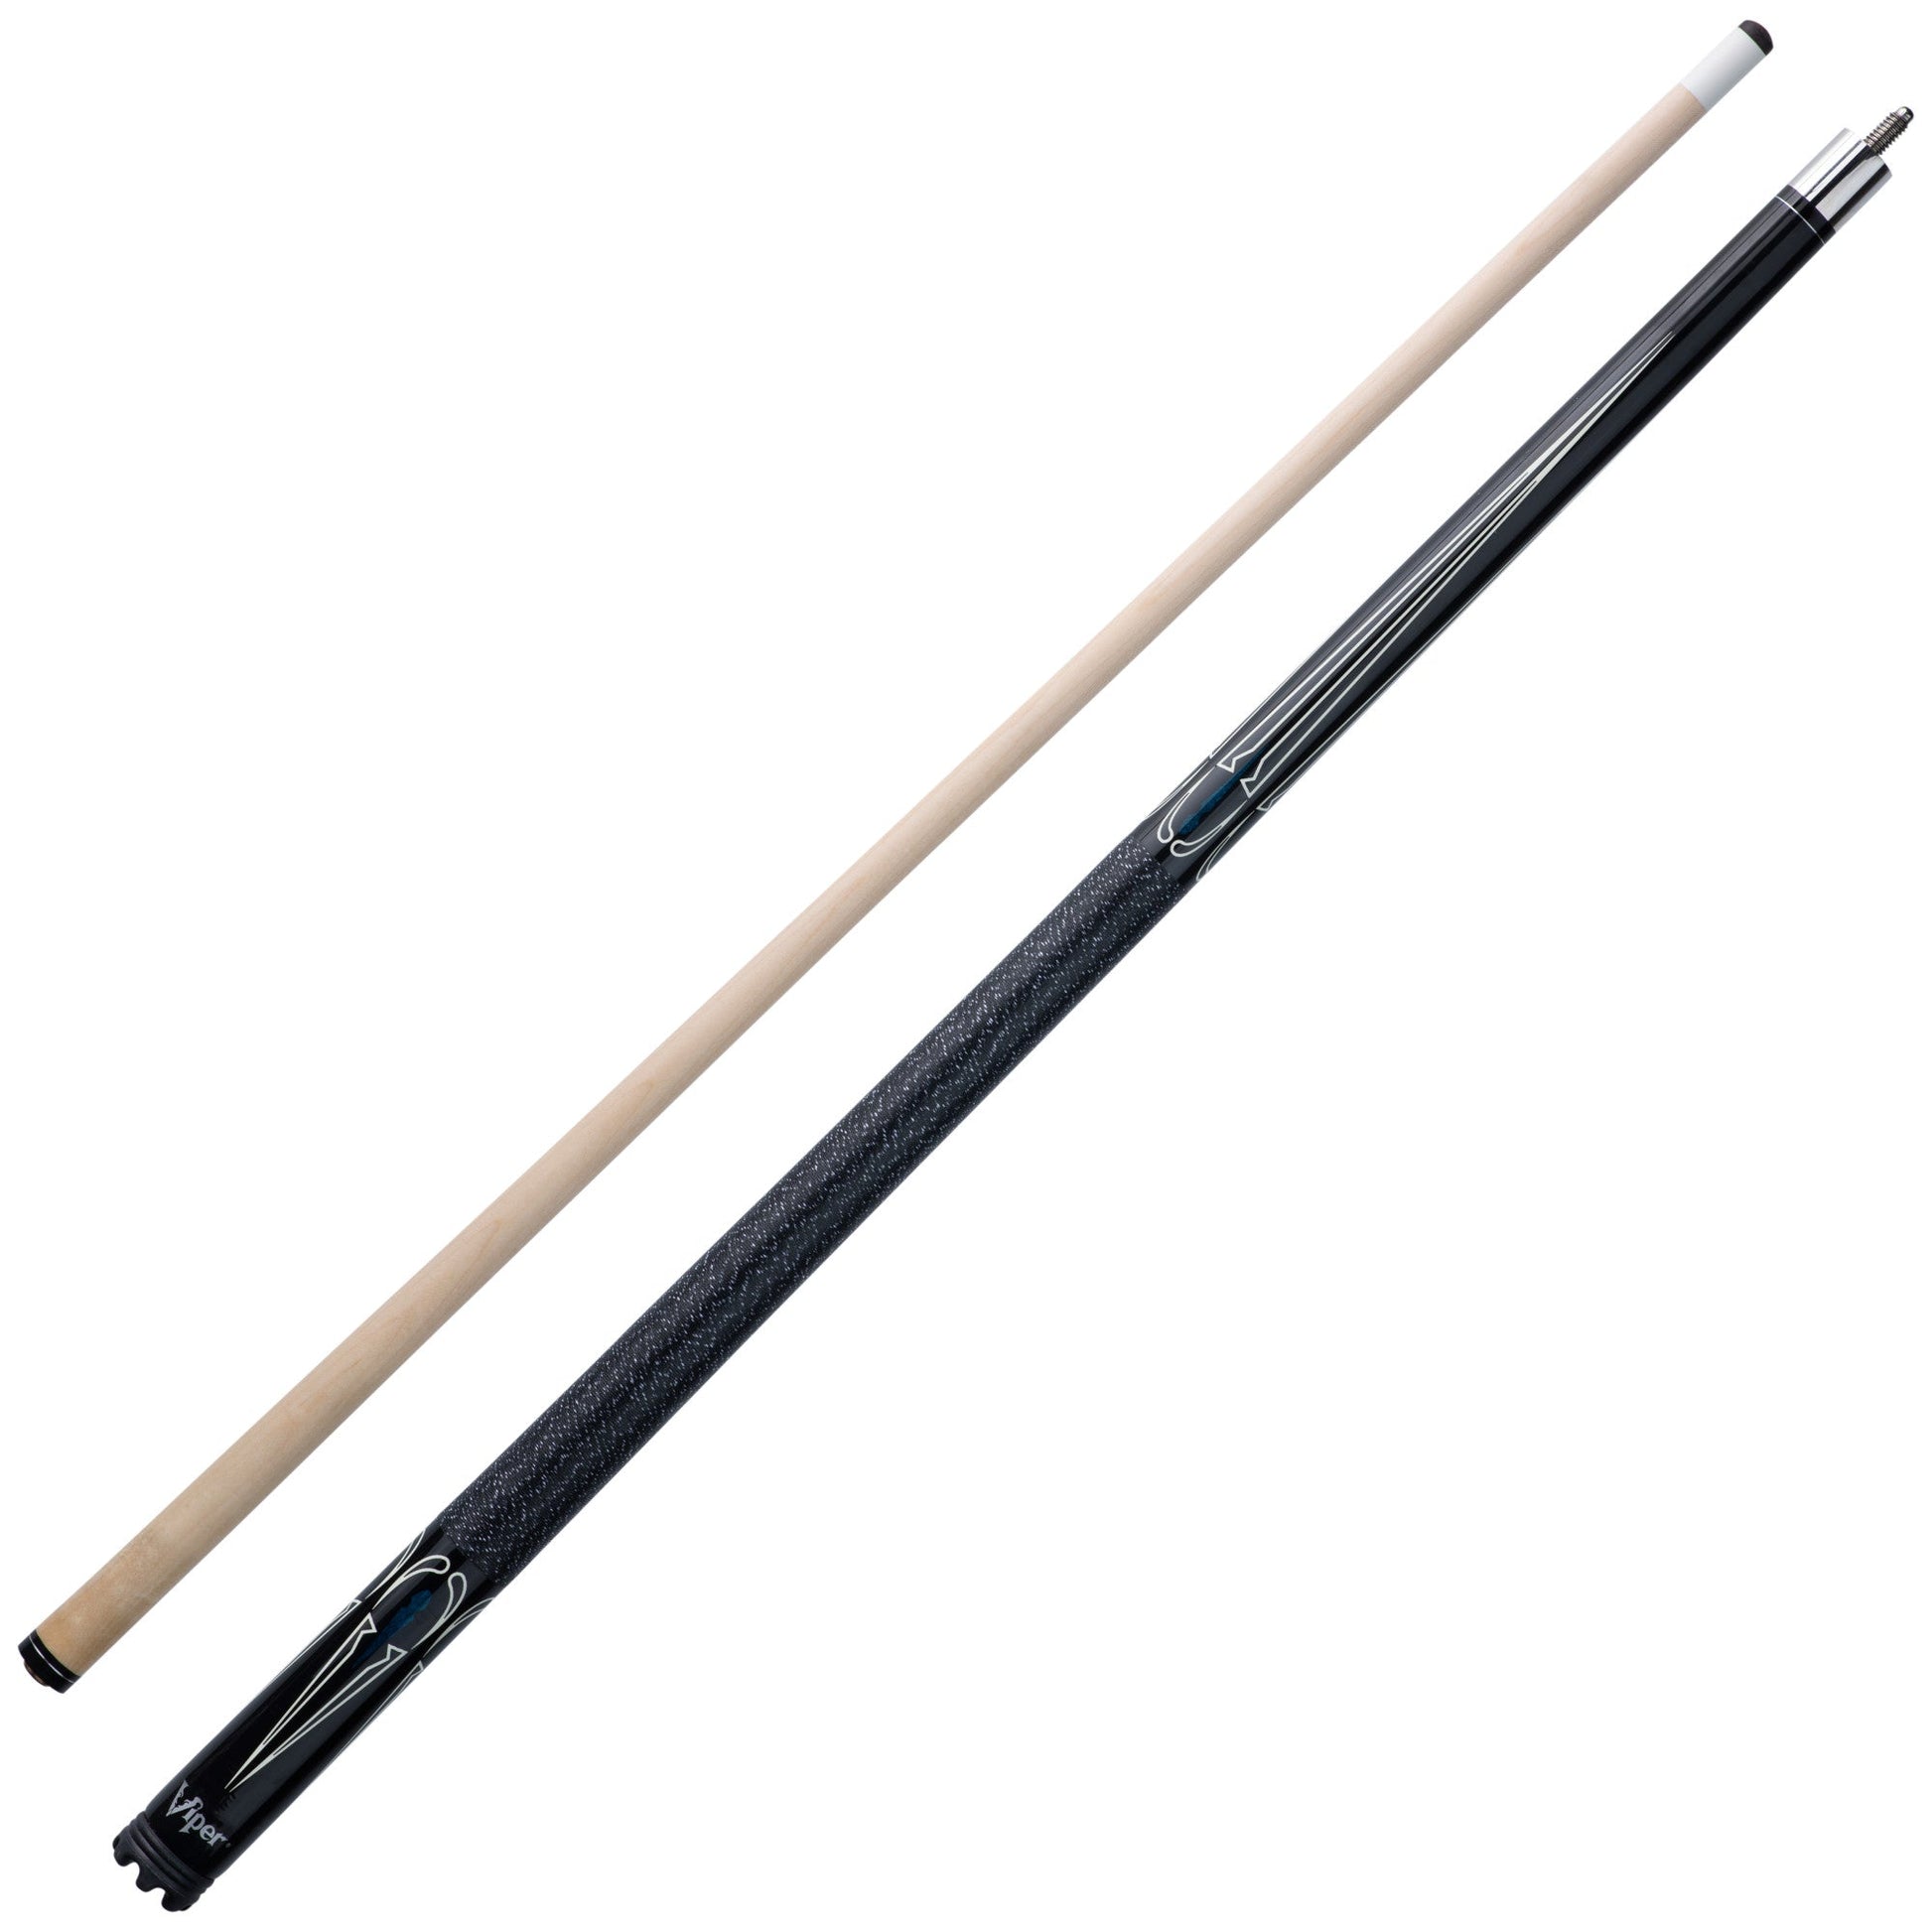 Viper Sinister Black and White Pool Cue Stick 19 Ounce